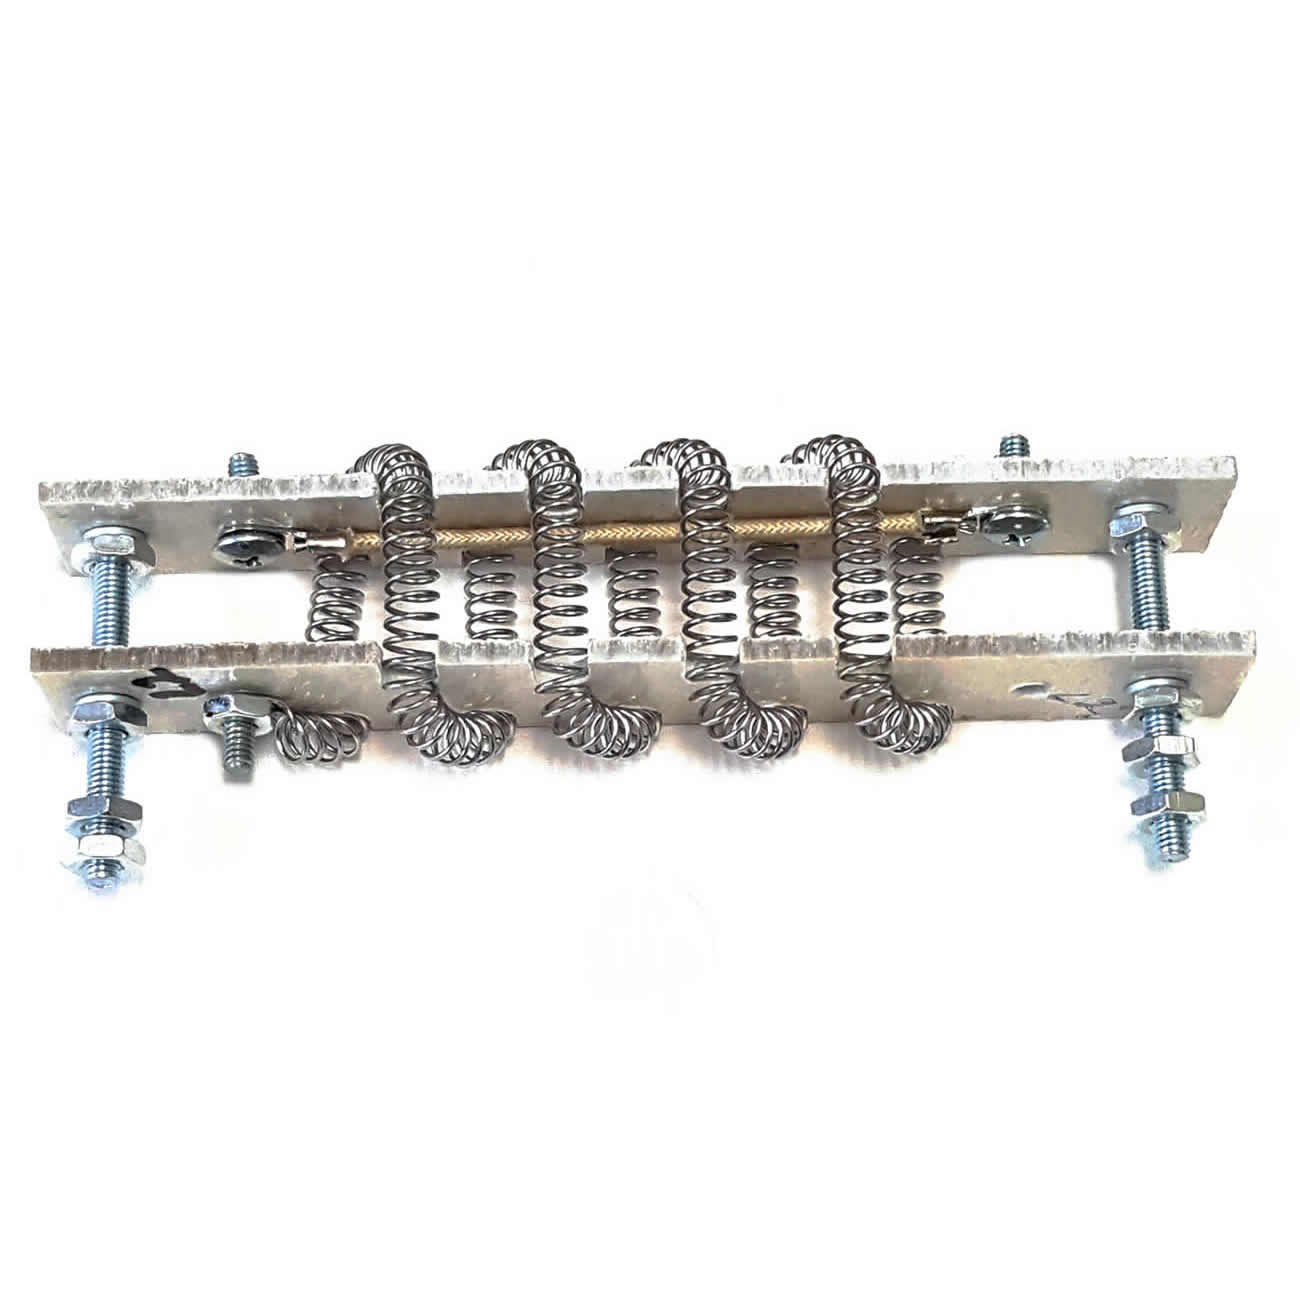 Edemco Dryer Heating Element for F3002 Dryer-Pet's Choice Supply